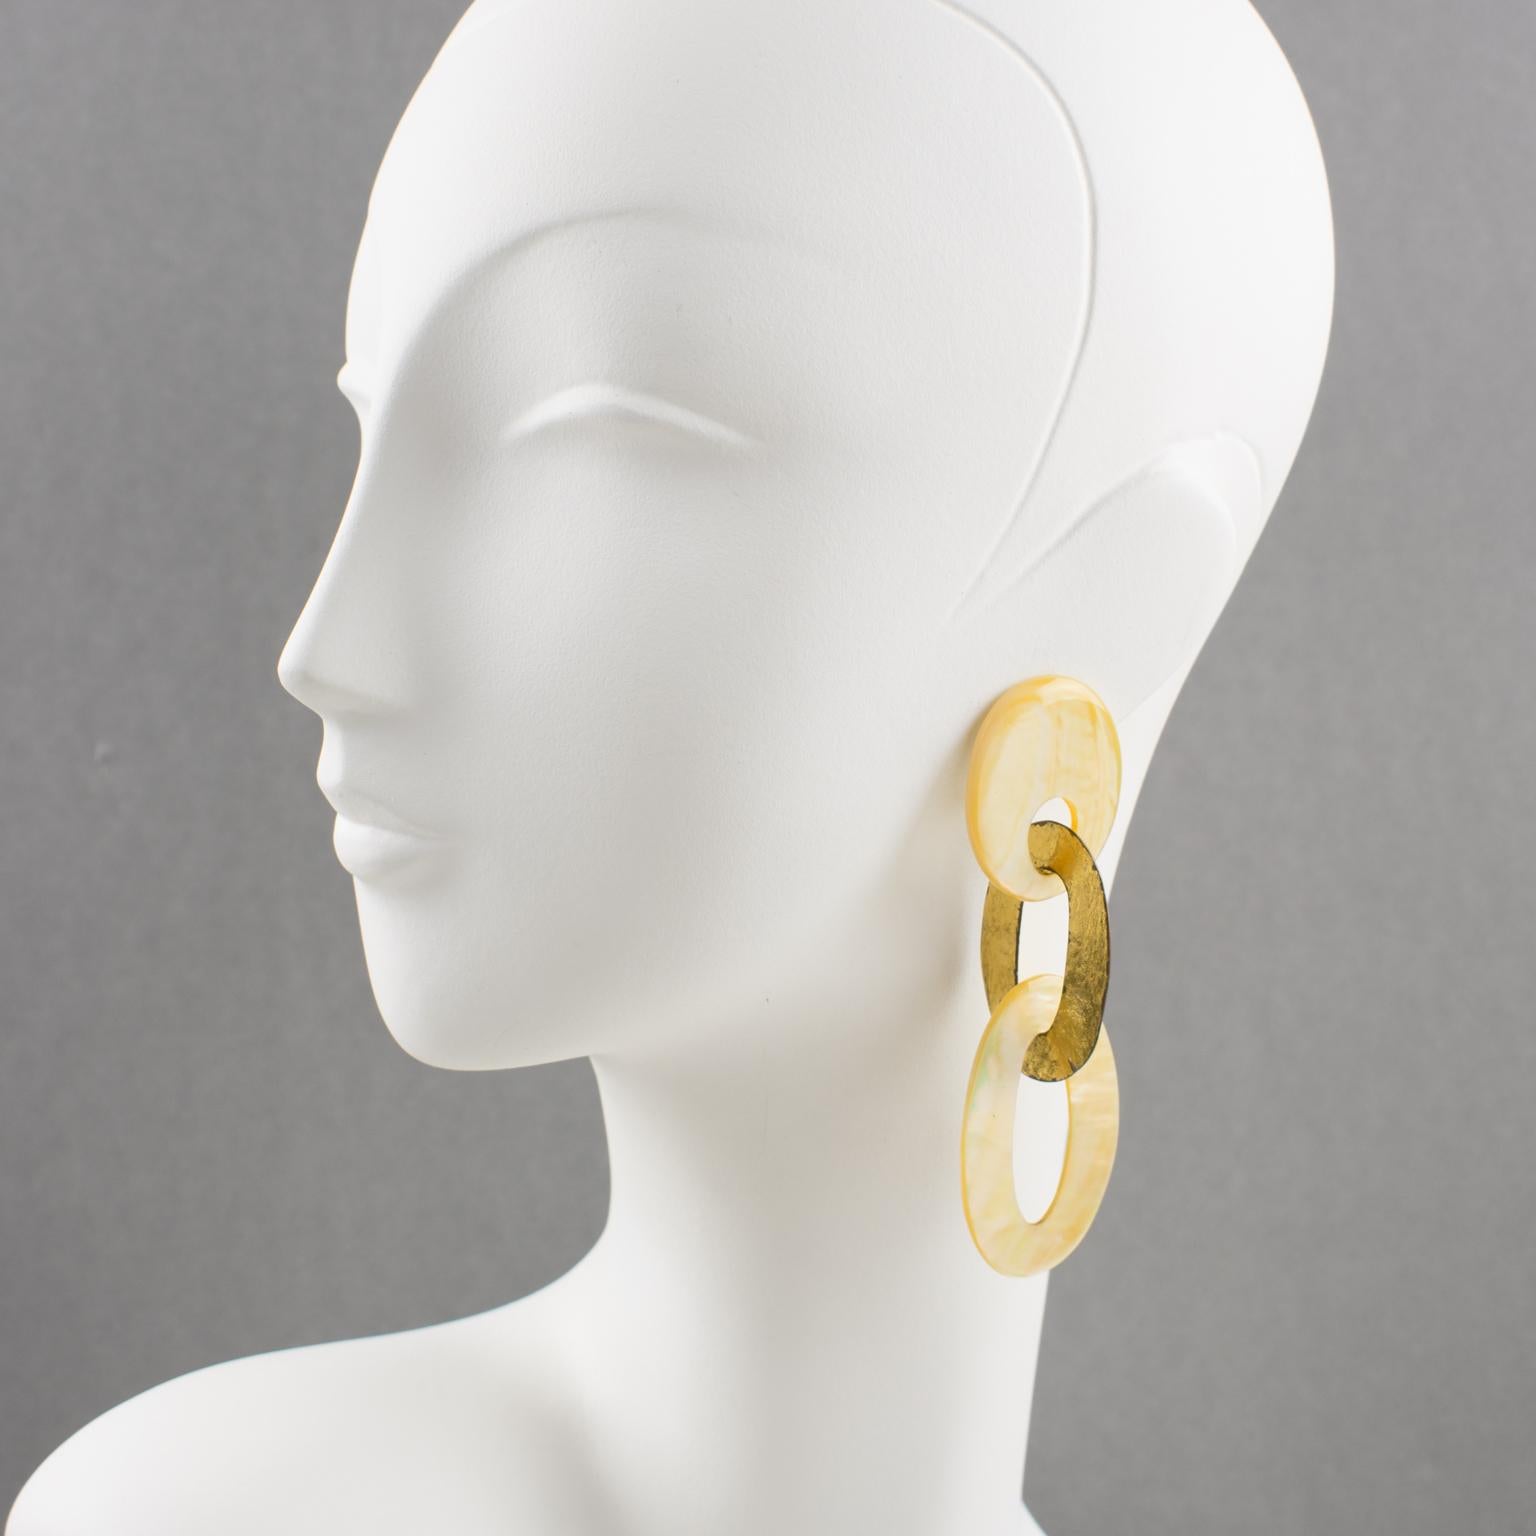 Gorgeous oversized clip-on earrings by Gerda Lyngaard for Monies. Large geometric oval flat link elements in gold foil coated metal contrasted with natural mother of pearl. Marked 'Monies' on each ear clip. 
Measurements: 3.94 in. long (10 cm) x